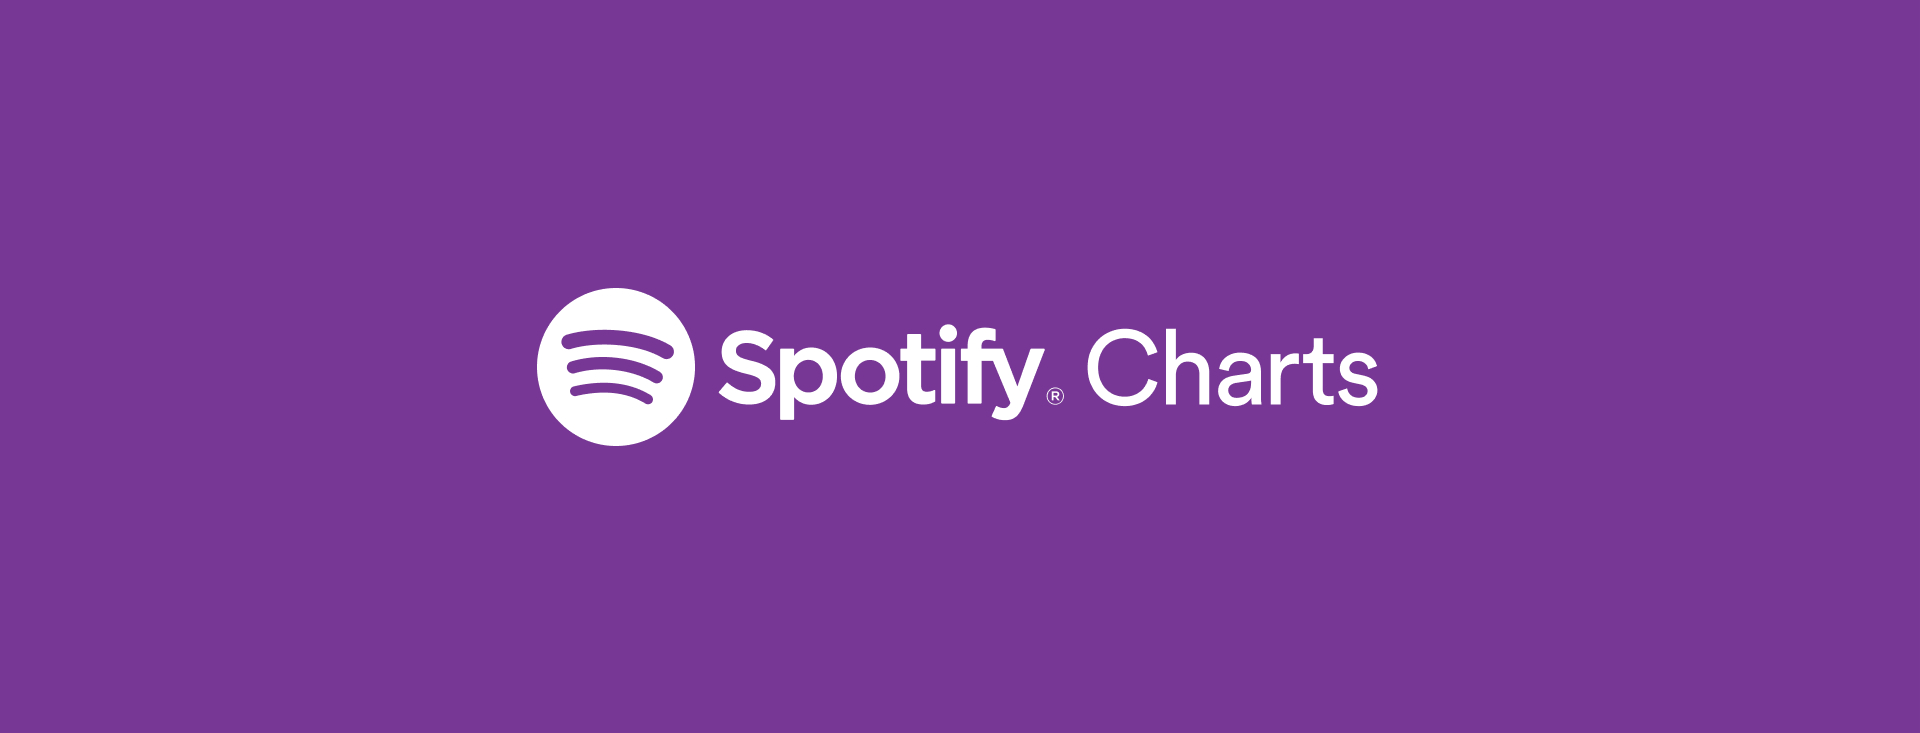 Spotify gets serious about its charts, launching weekly Top 50